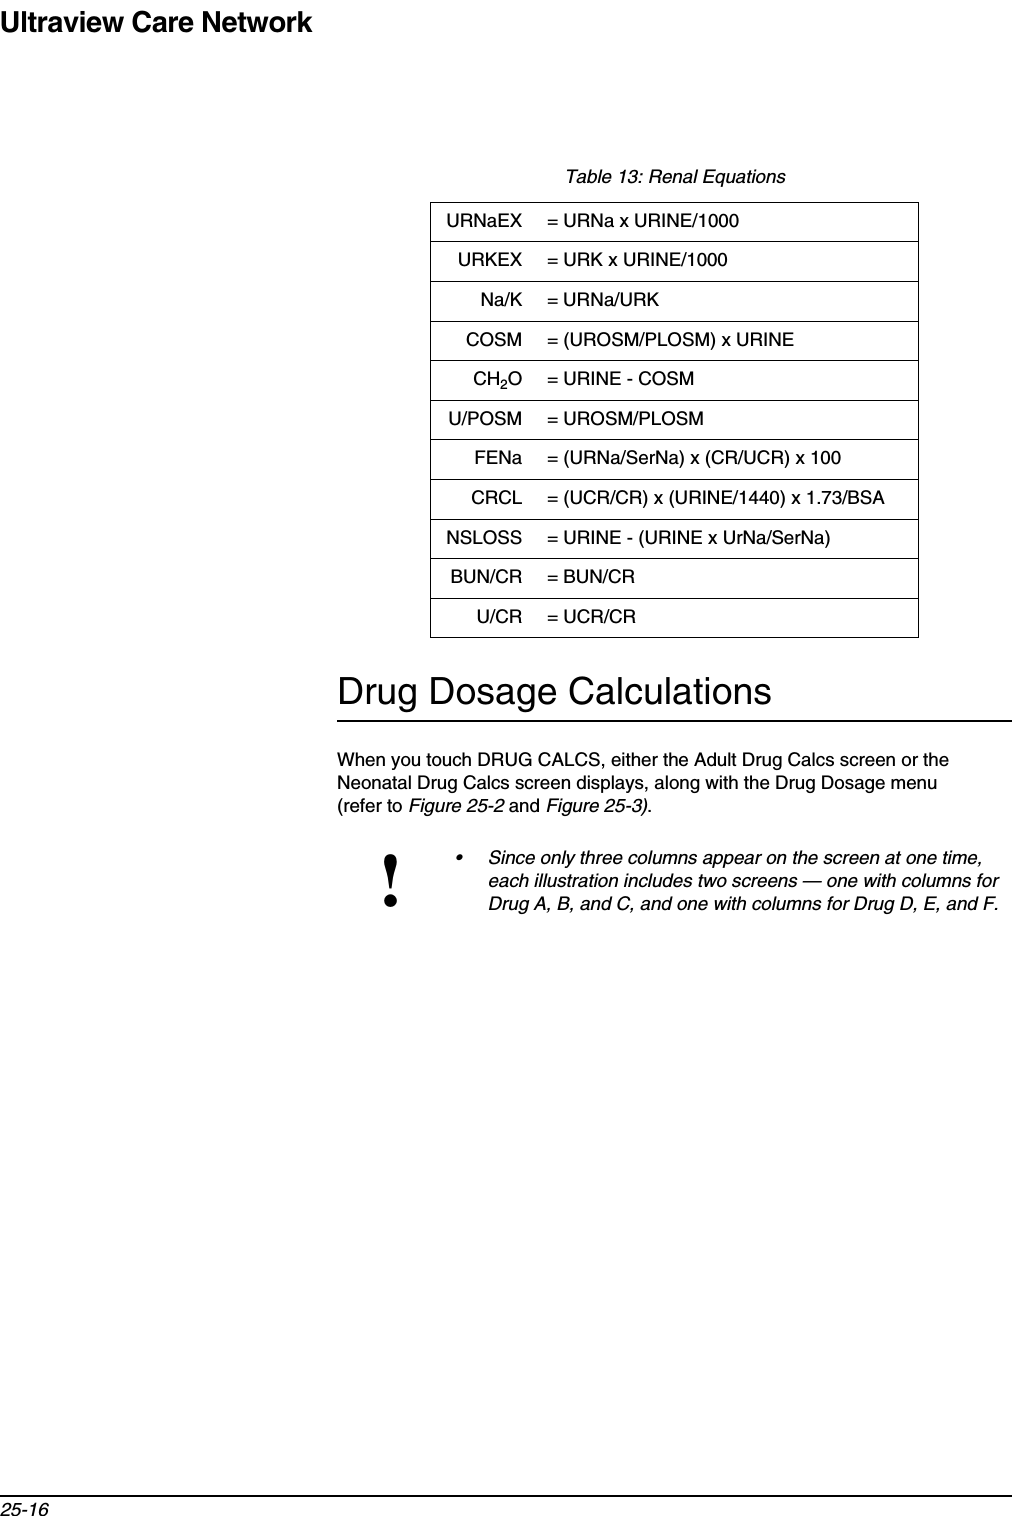 Ultraview Care Network25-16Drug Dosage CalculationsWhen you touch DRUG CALCS, either the Adult Drug Calcs screen or the Neonatal Drug Calcs screen displays, along with the Drug Dosage menu (refer to Figure 25-2 and Figure 25-3).Table 13: Renal EquationsURNaEX = URNa x URINE/1000URKEX = URK x URINE/1000Na/K = URNa/URKCOSM = (UROSM/PLOSM) x URINECH2O = URINE - COSMU/POSM = UROSM/PLOSMFENa = (URNa/SerNa) x (CR/UCR) x 100CRCL = (UCR/CR) x (URINE/1440) x 1.73/BSANSLOSS = URINE - (URINE x UrNa/SerNa)BUN/CR = BUN/CRU/CR = UCR/CR!• Since only three columns appear on the screen at one time, each illustration includes two screens — one with columns for Drug A, B, and C, and one with columns for Drug D, E, and F.